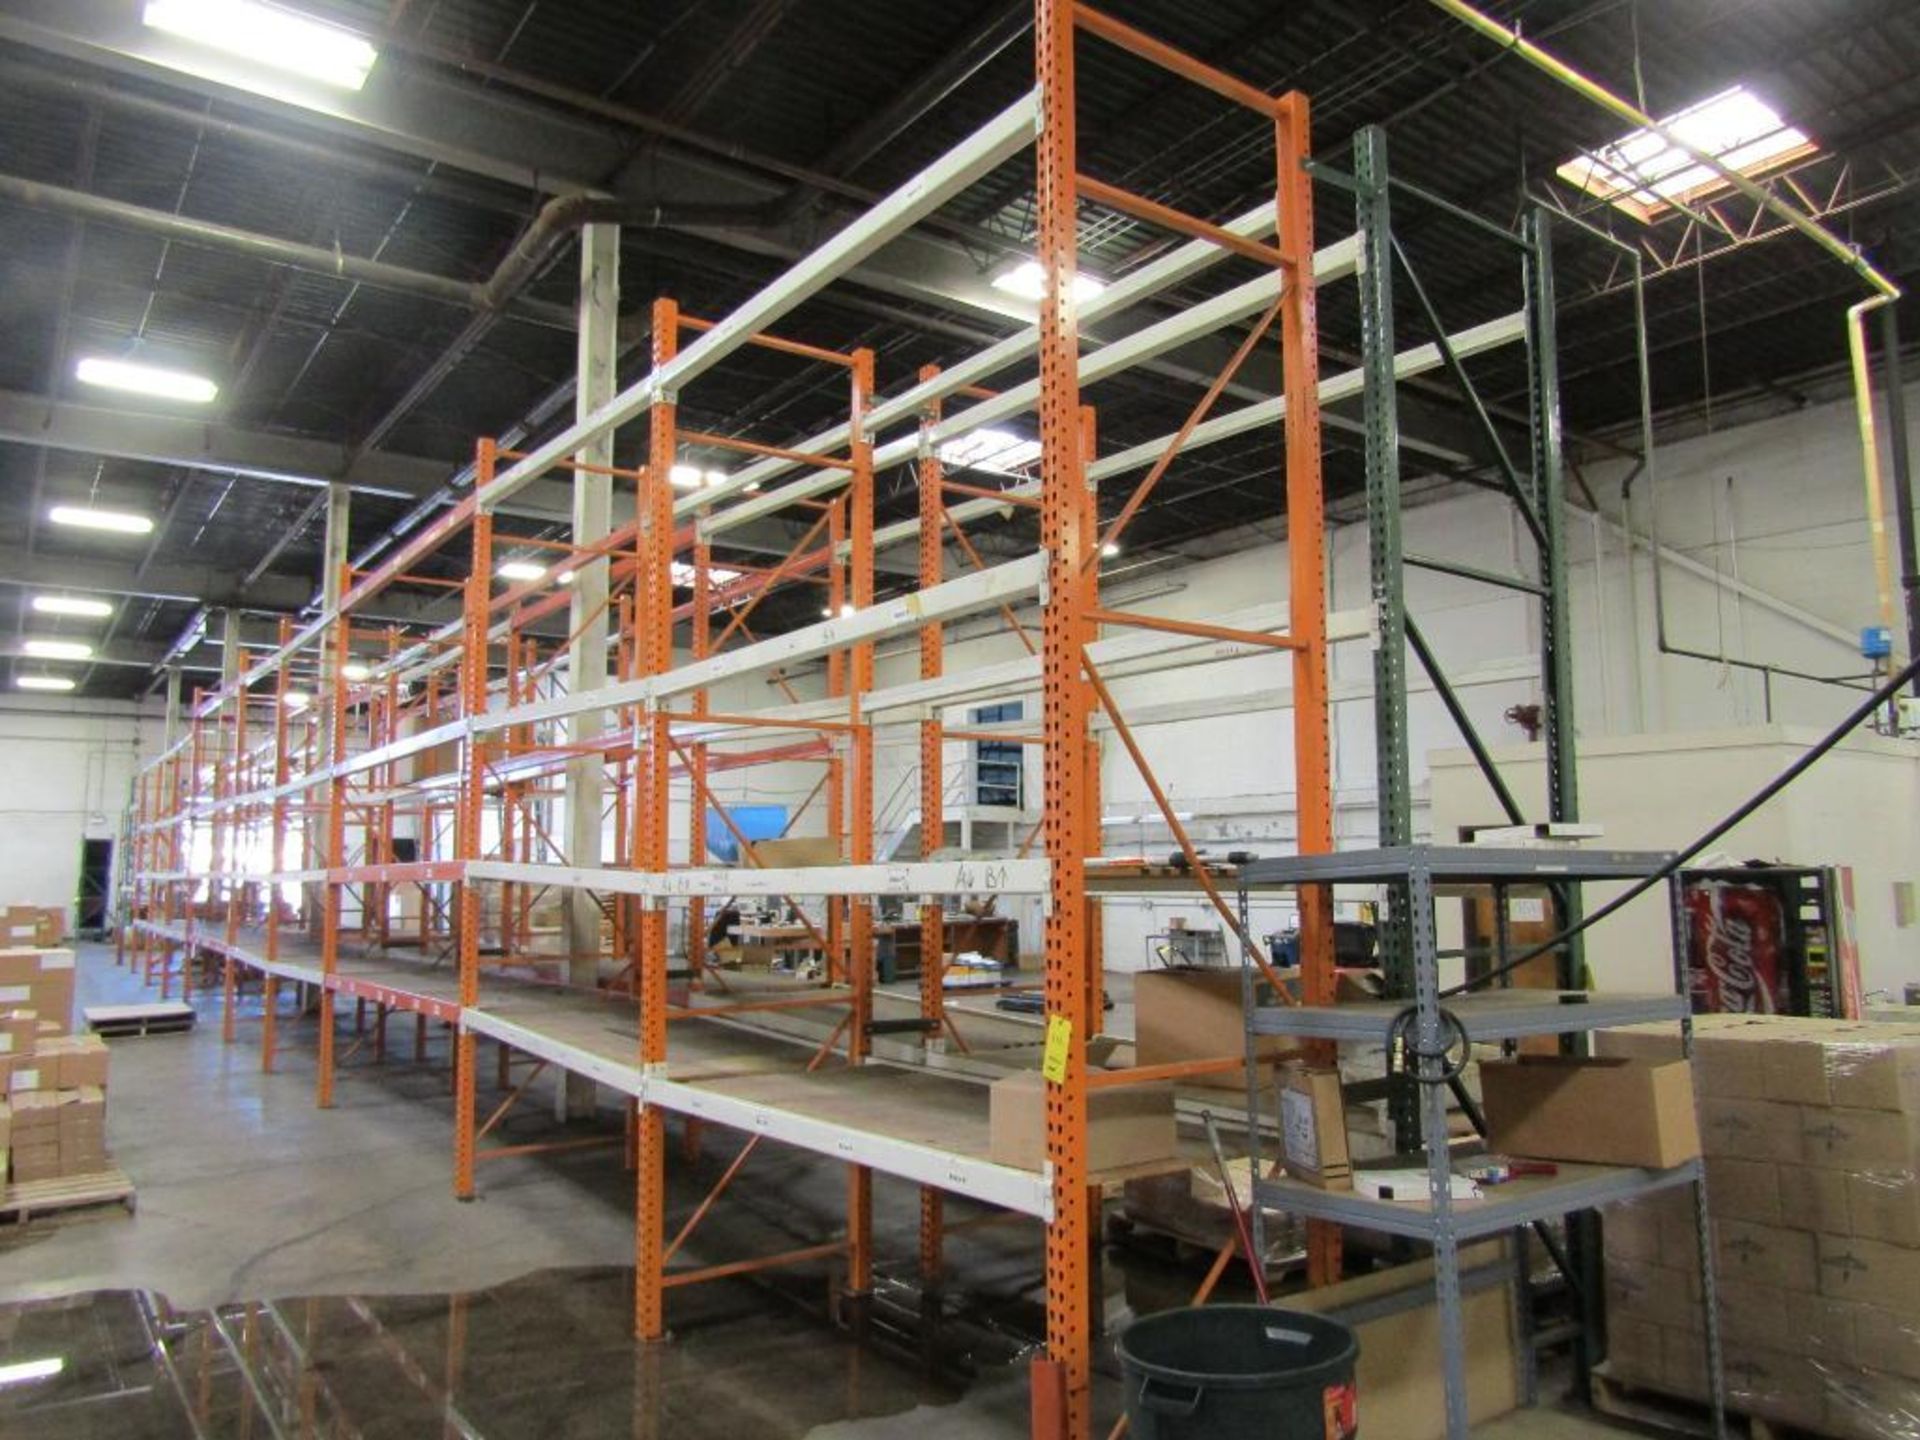 LOT: (10) Pallet Rack Sections - (4) 14ft. x 8ft. X 36in., (2) 14ft. x 12ft. x 36in., (4) 12ft. x